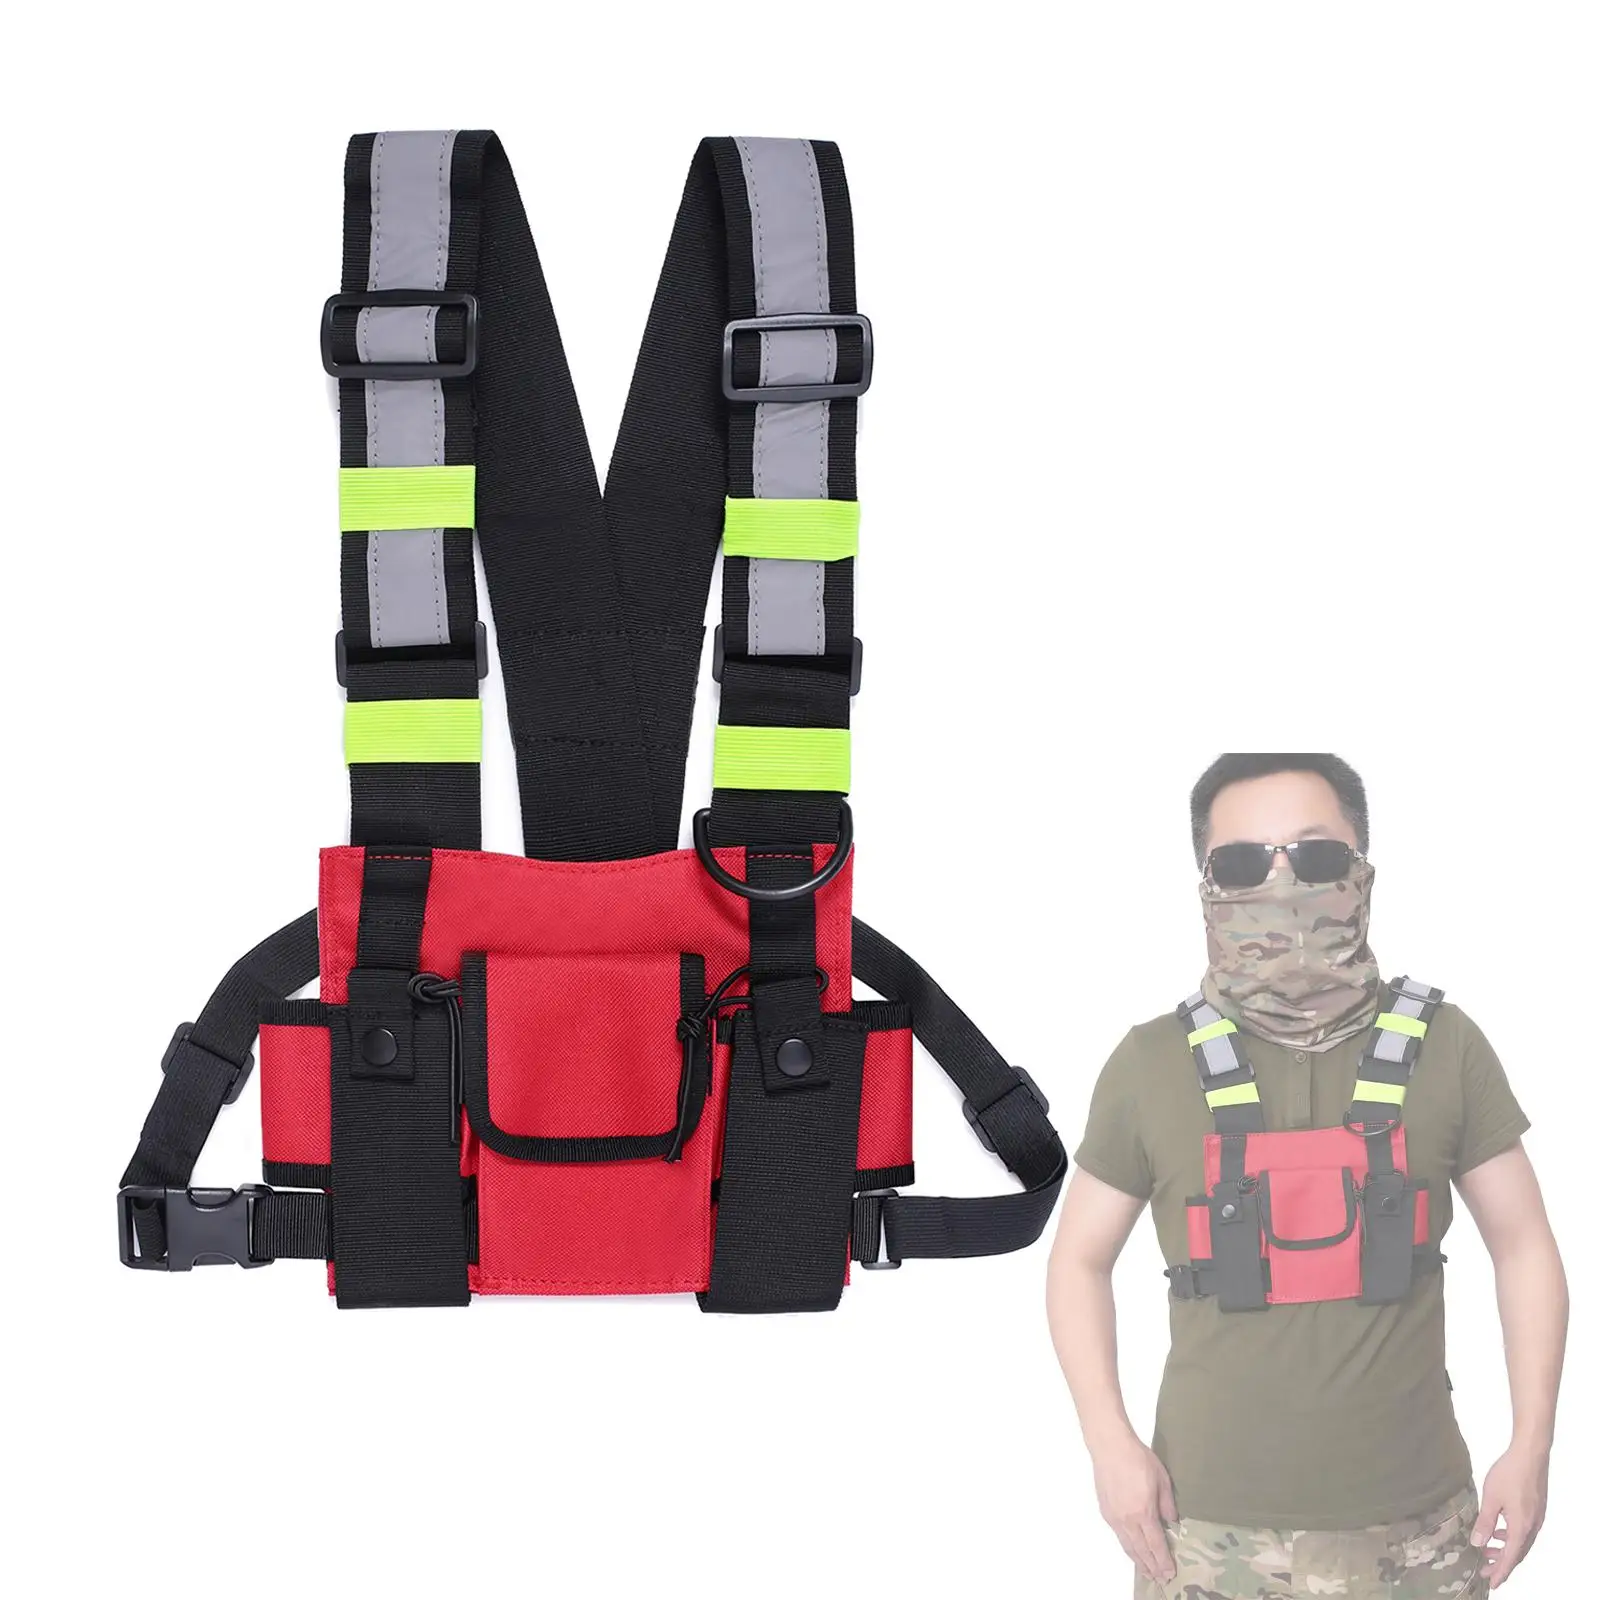 Chest  Bag for Men Fashion Chest Rig  Harness Lightweight Bags for Men Women Running Exercise Hiking Camping